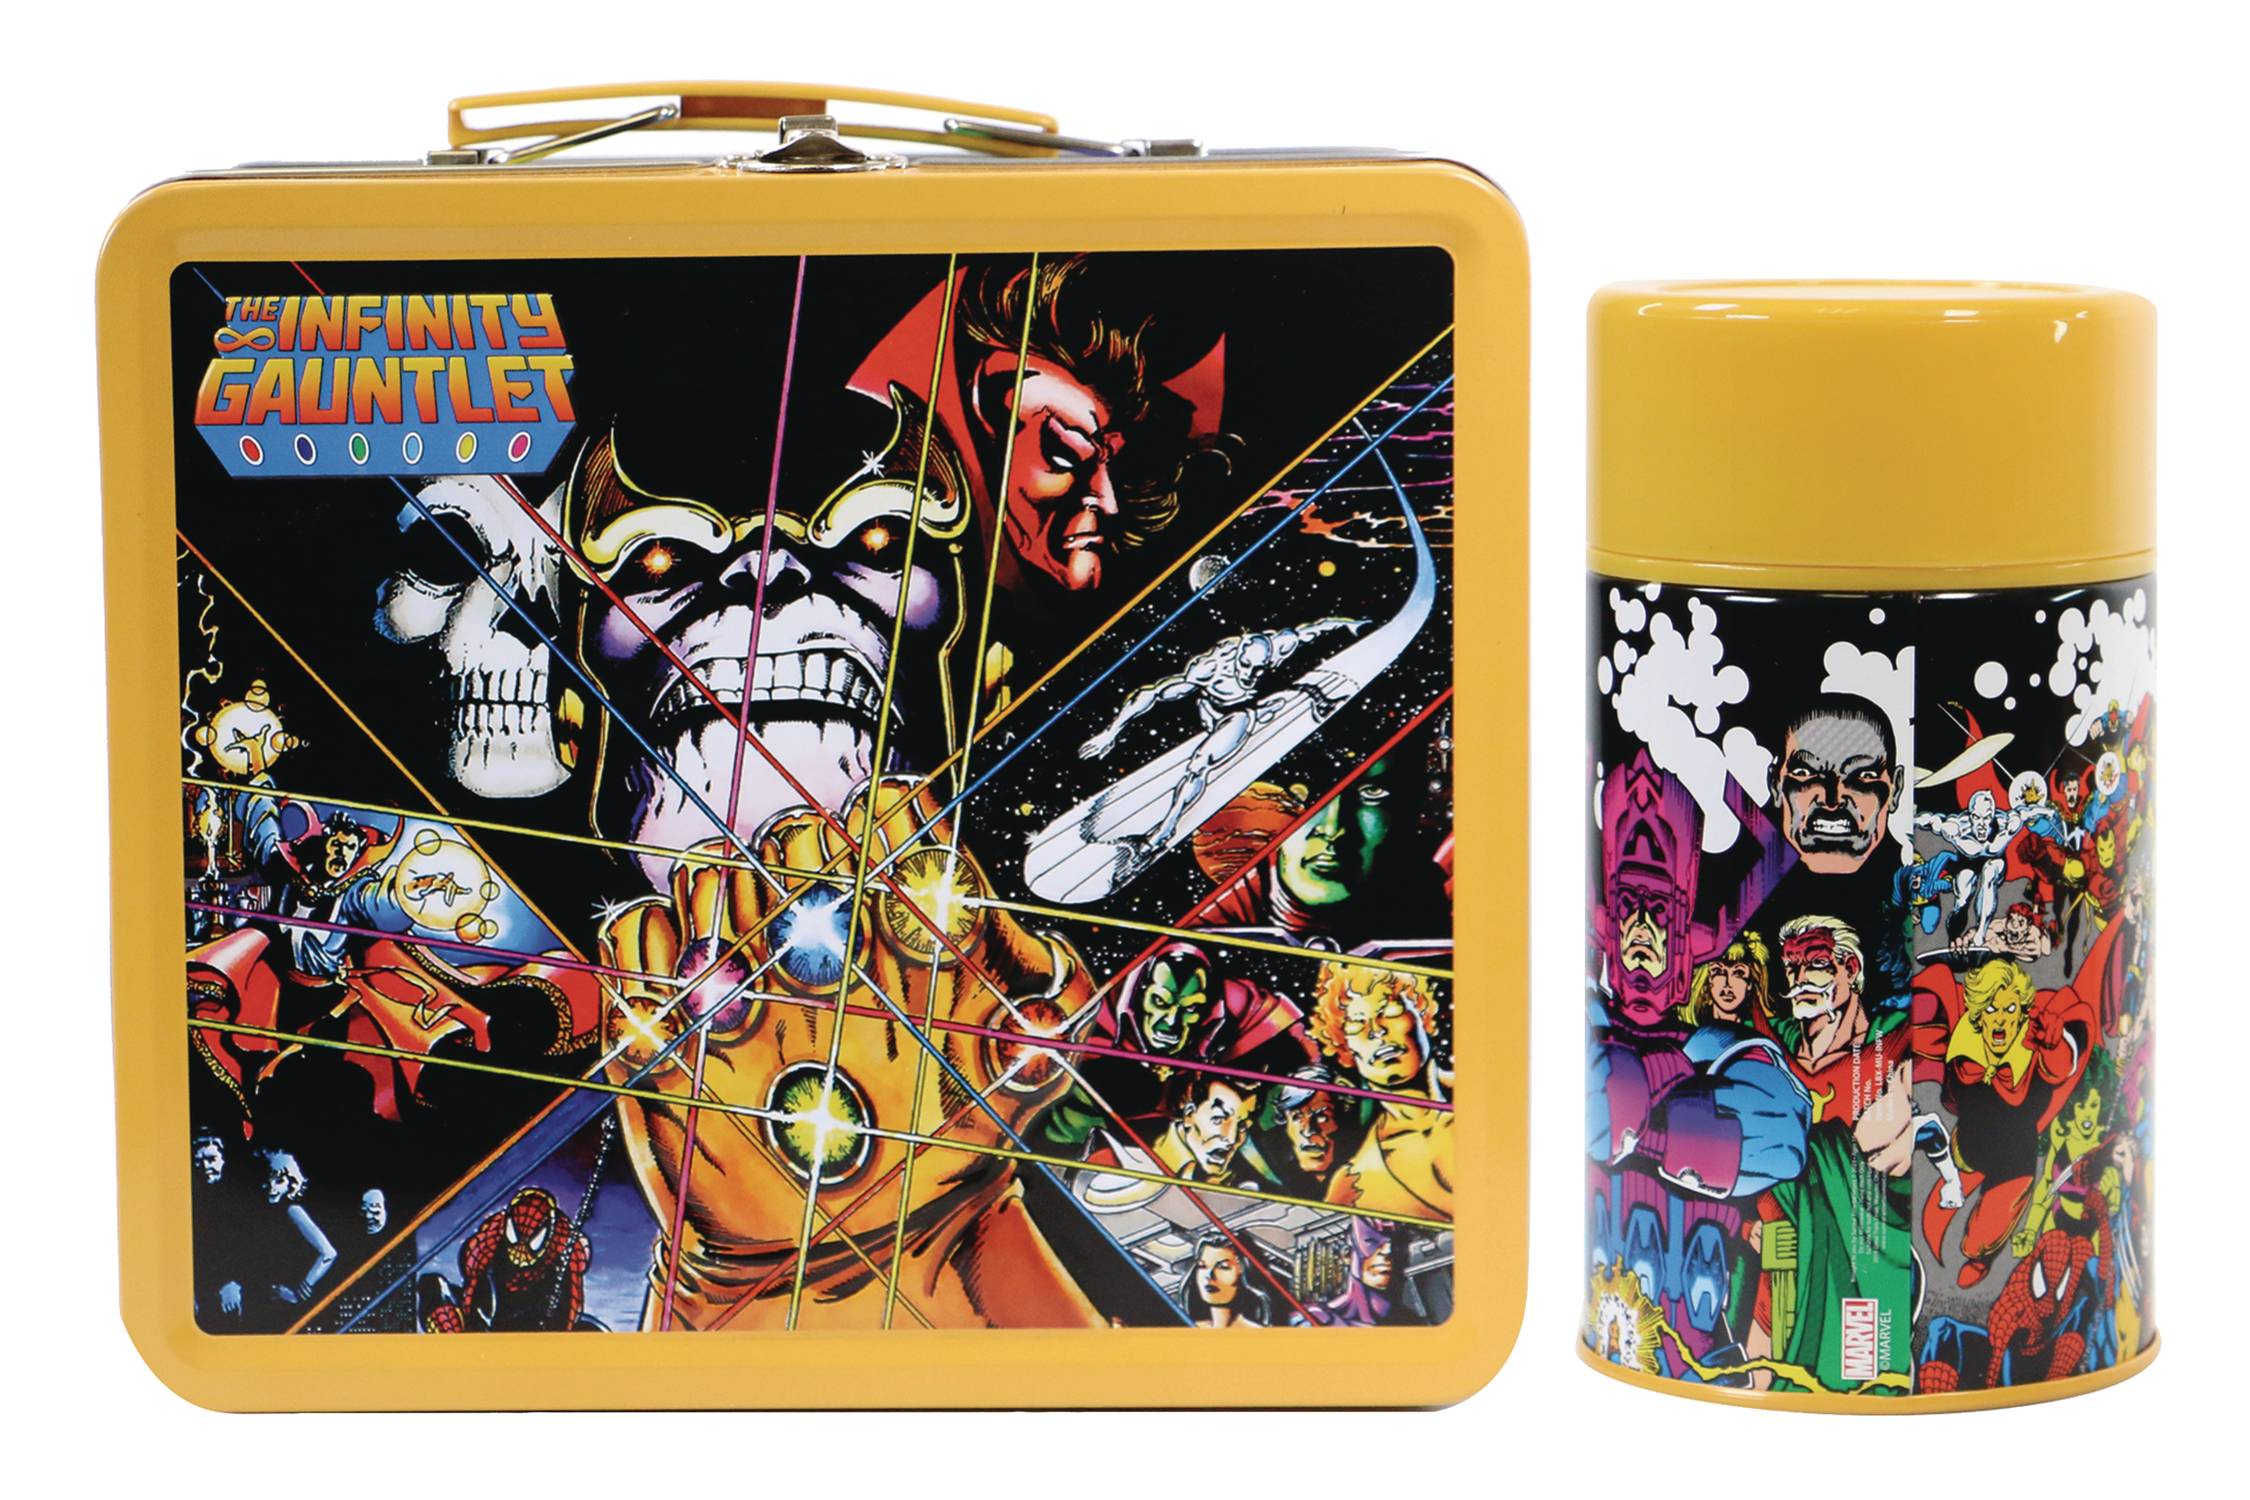 TIN TITANS THE INFINITY GAUNTLET PX LUNCH BOX W/BEV CON